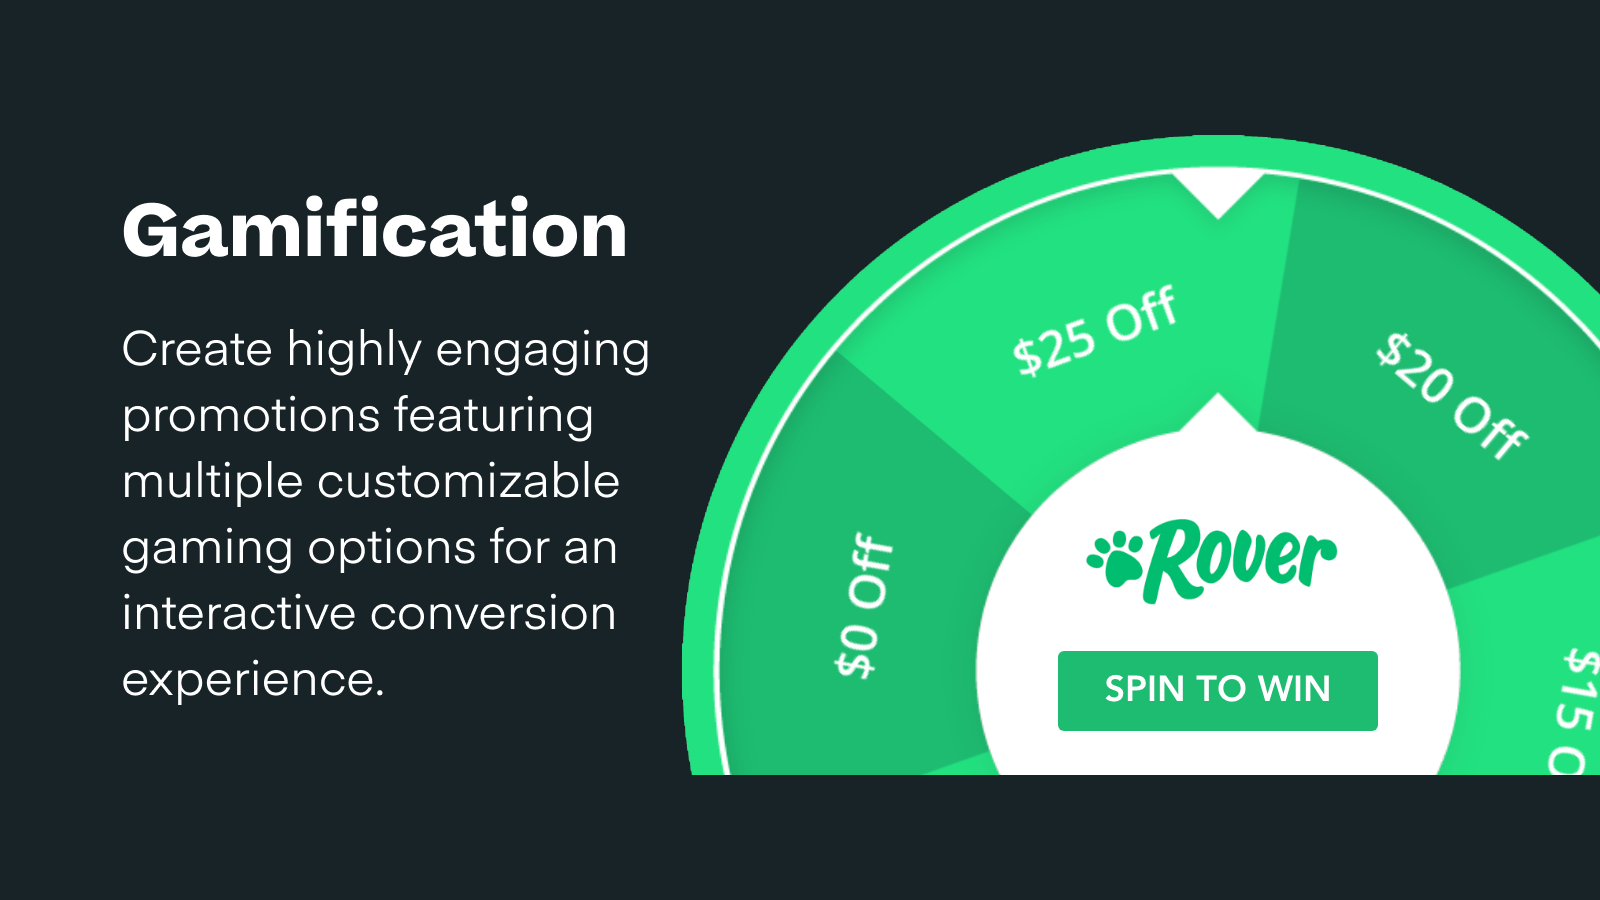 Gamification - Create highly engaging promotions